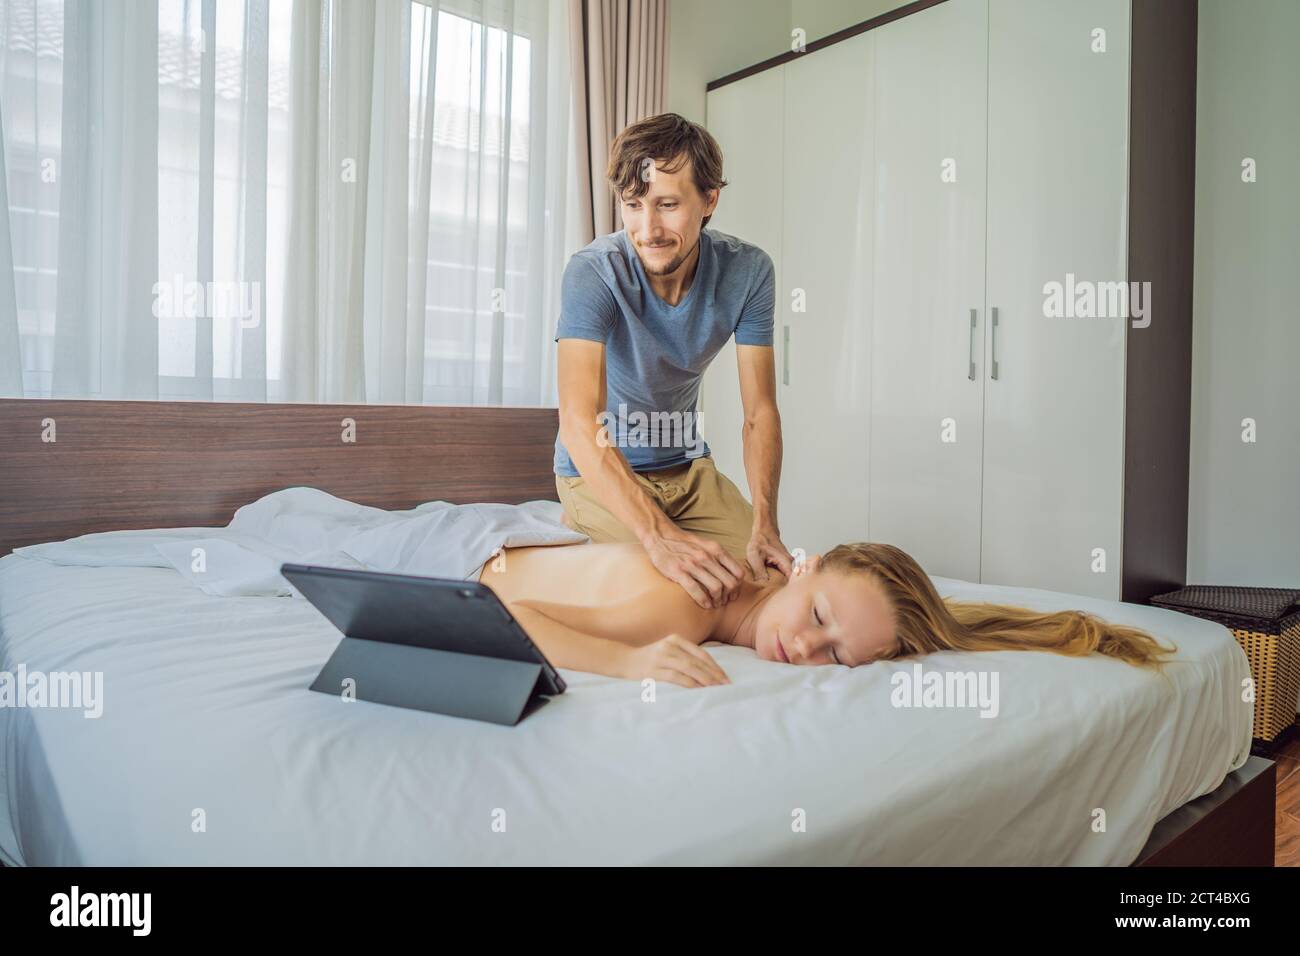 Massage by training online video. Online massage training. Health Wellness Massage Online Training Concept Stock Photo